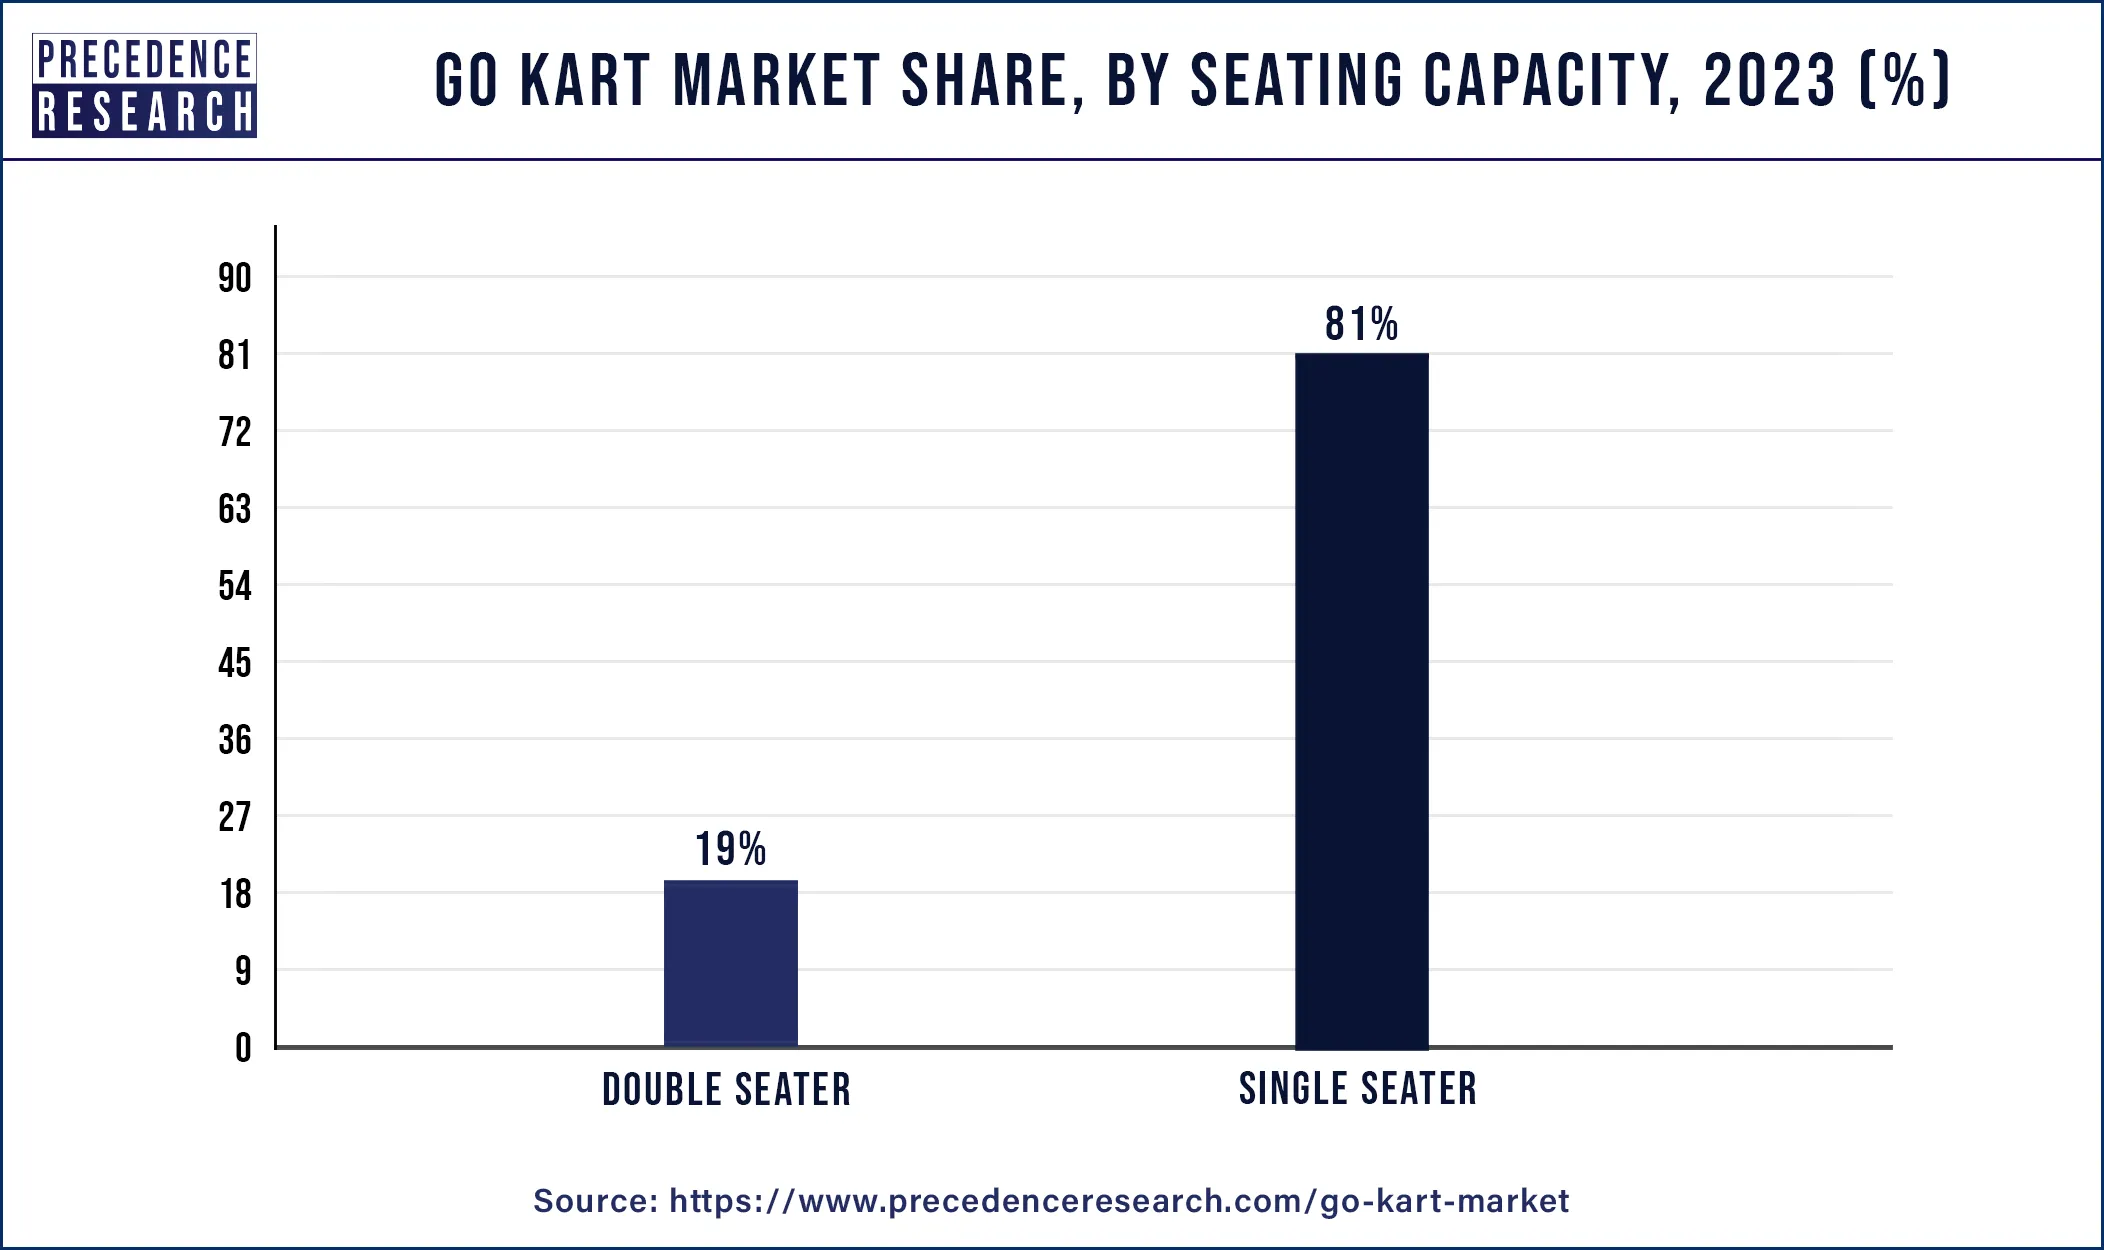 Go Kart Market Share, By Seating Capacity, 2023 (%)